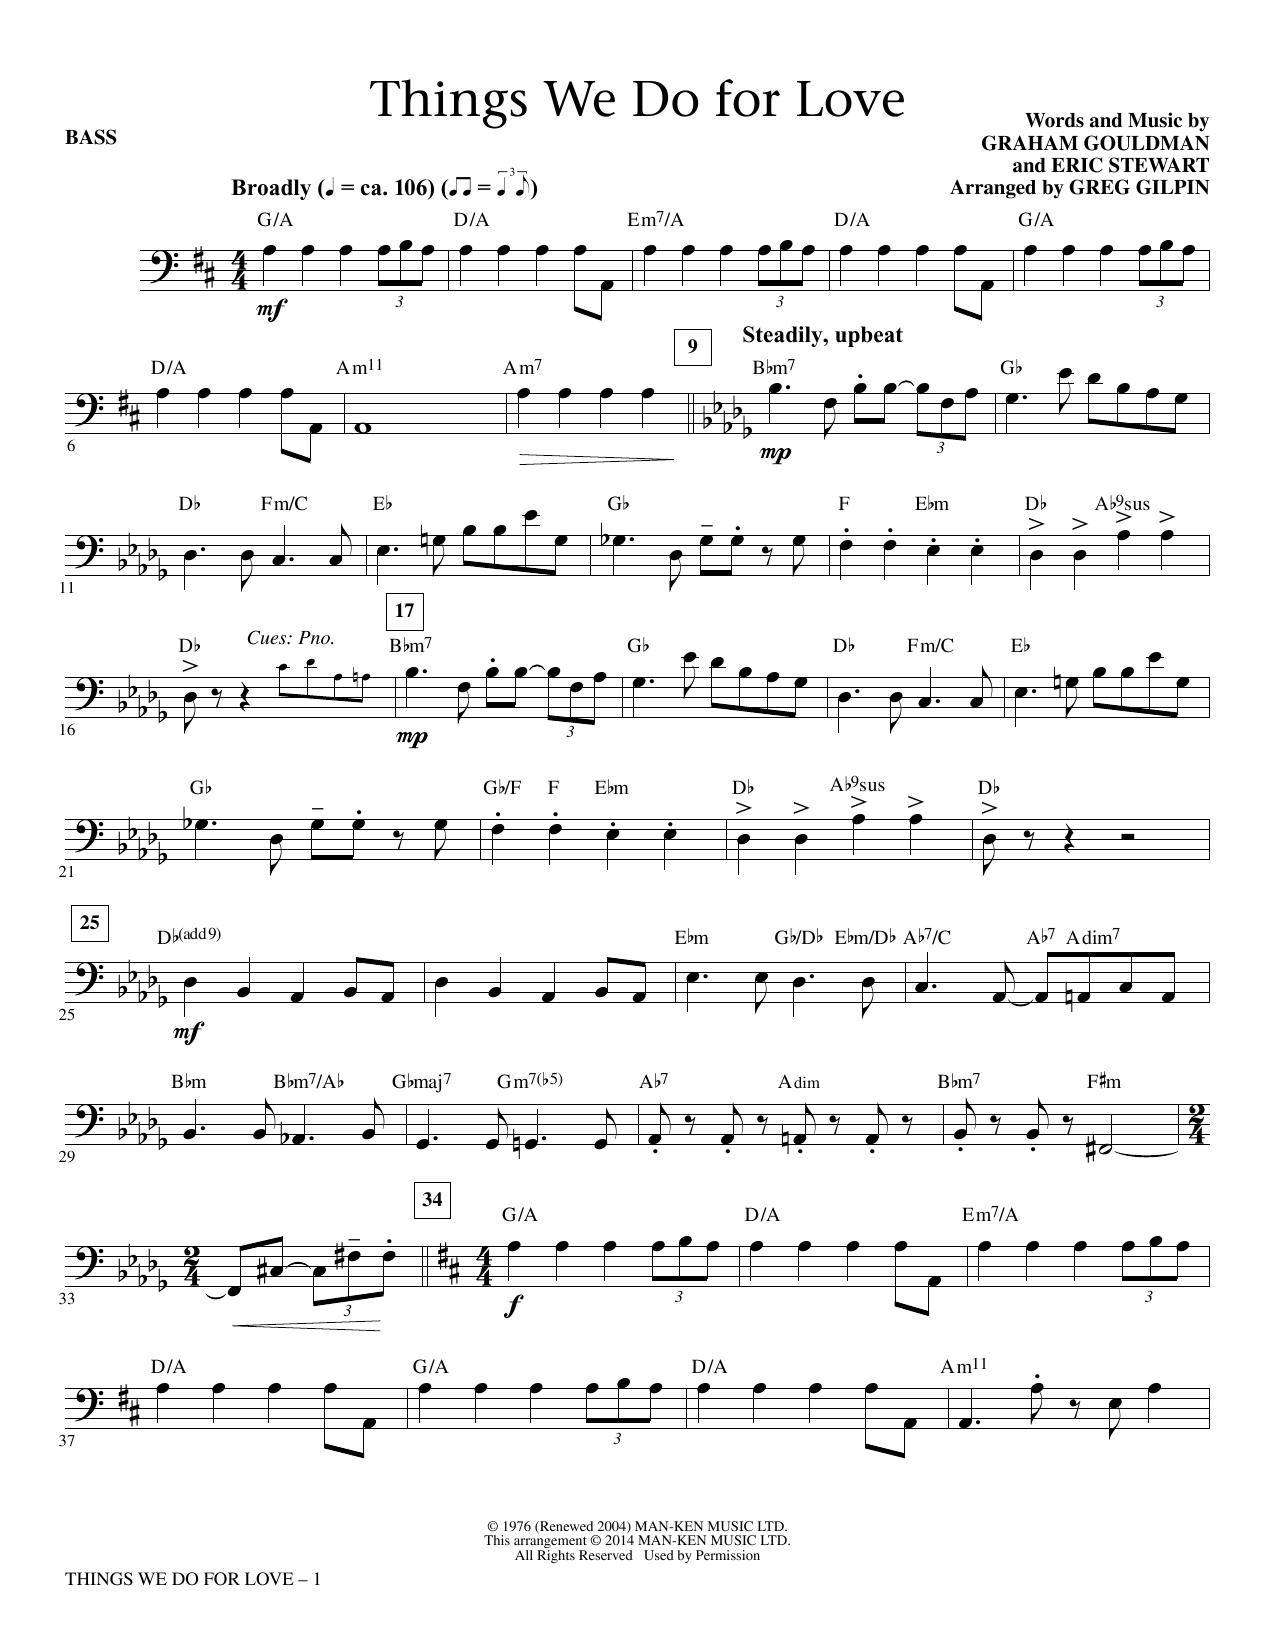 Greg Gilpin Things We Do for Love - Bass sheet music notes and chords. Download Printable PDF.